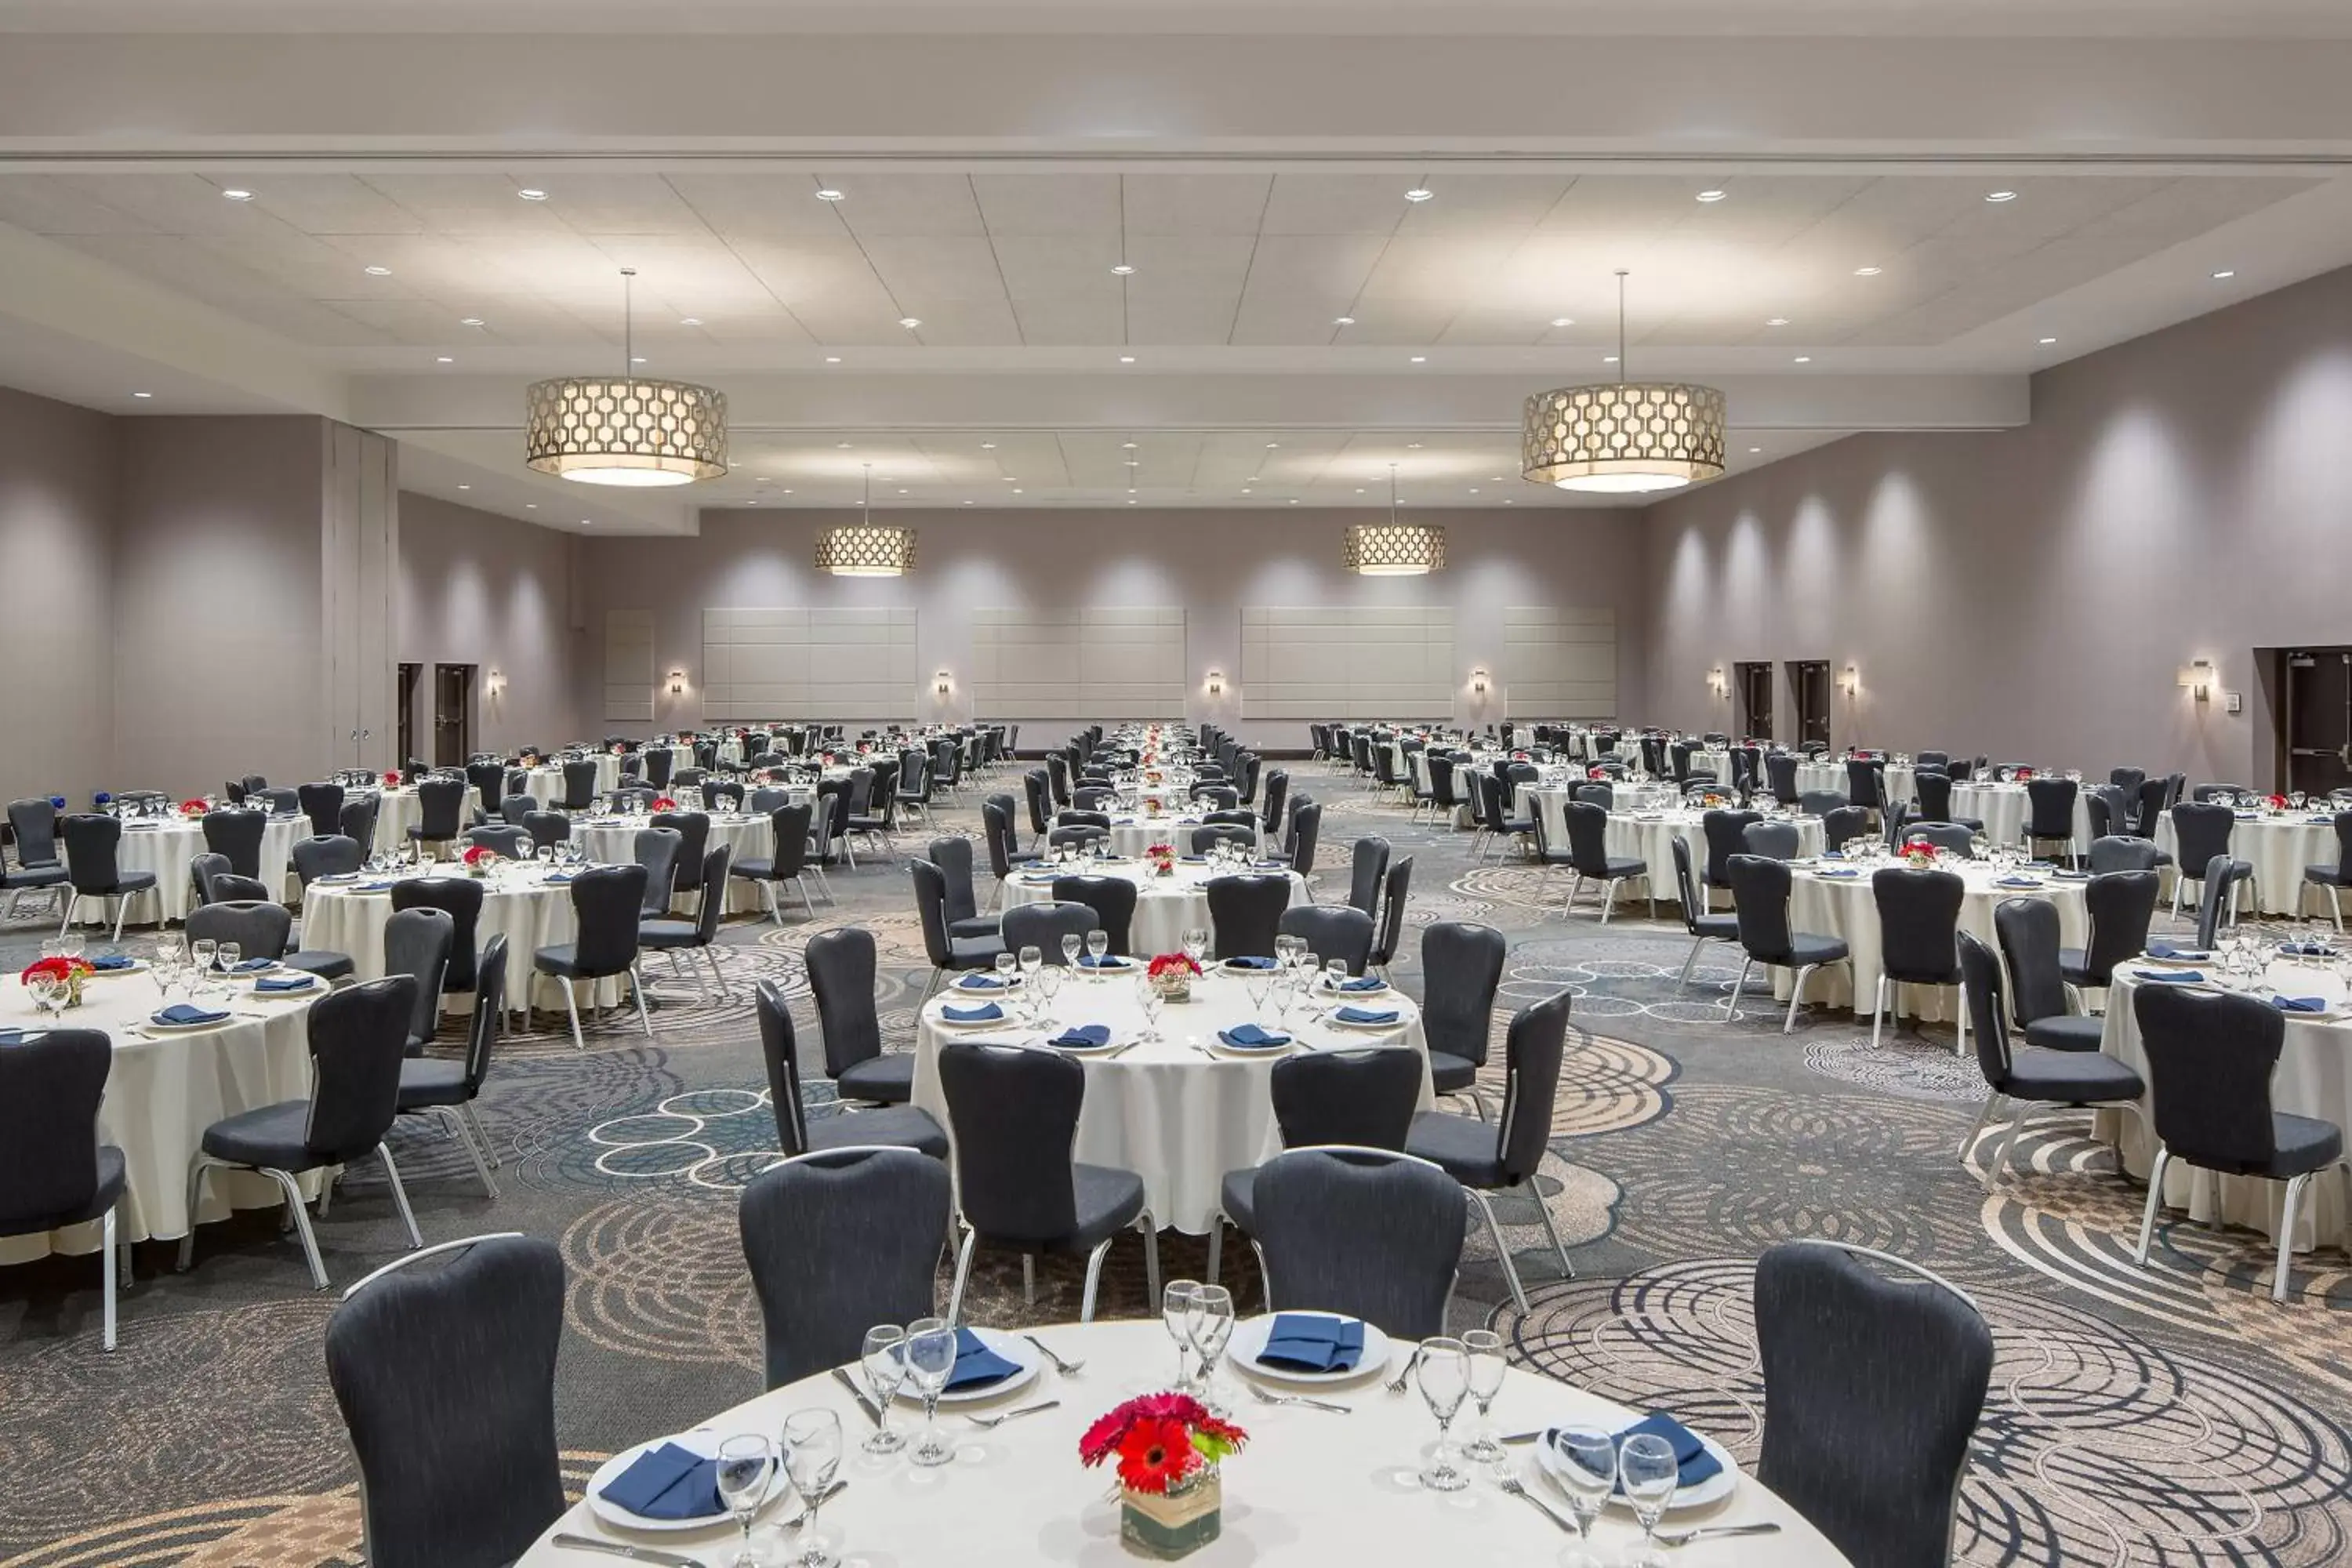 Meeting/conference room, Banquet Facilities in Sheraton Vancouver Airport Hotel